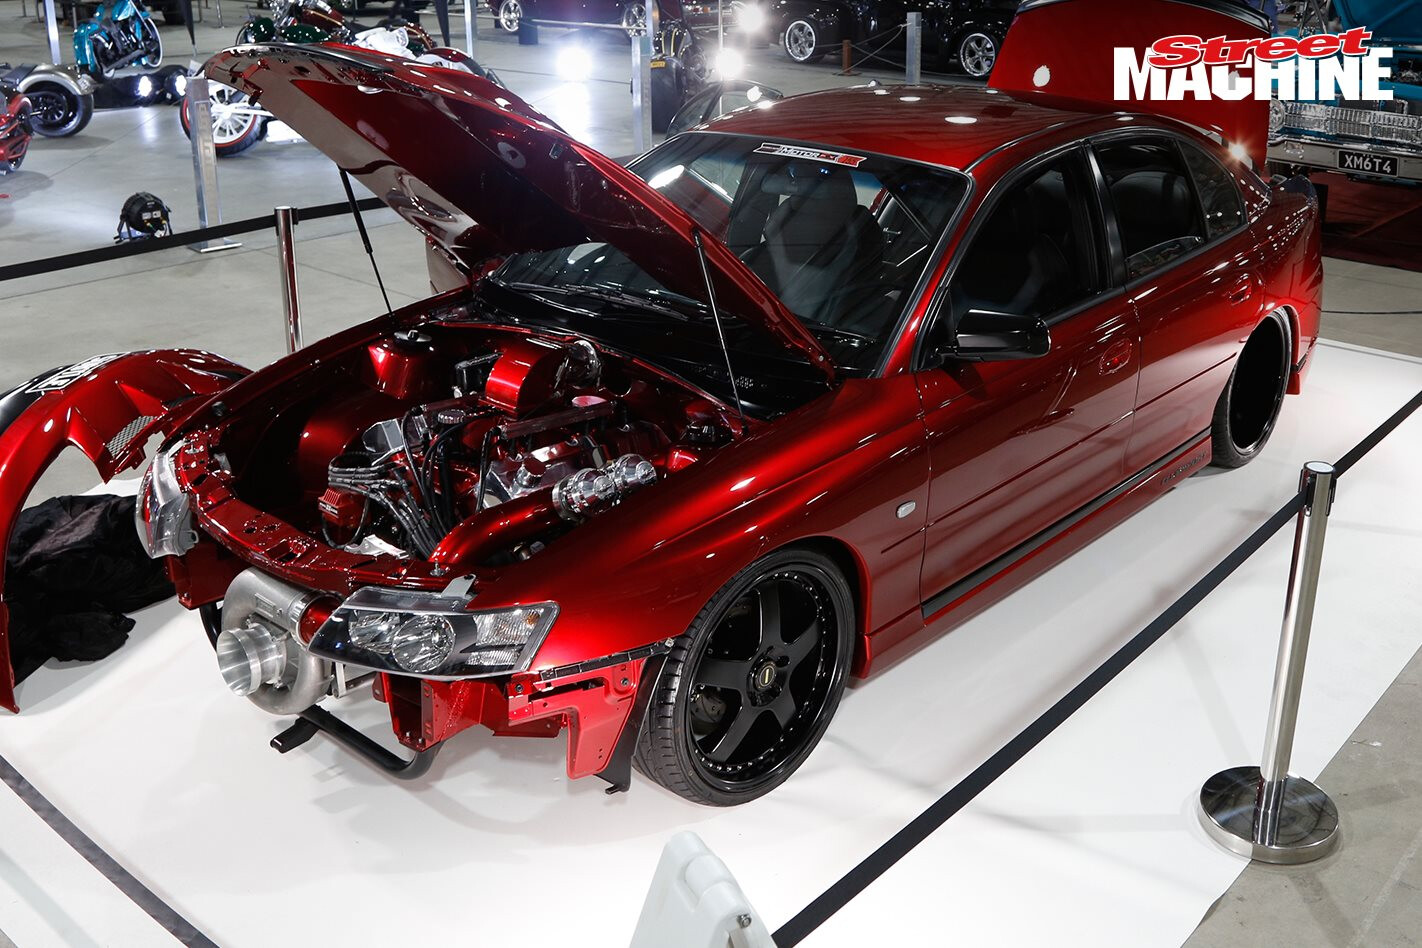 2000hp Vortech blown VY Commodore unveiled at MotorEx – Video